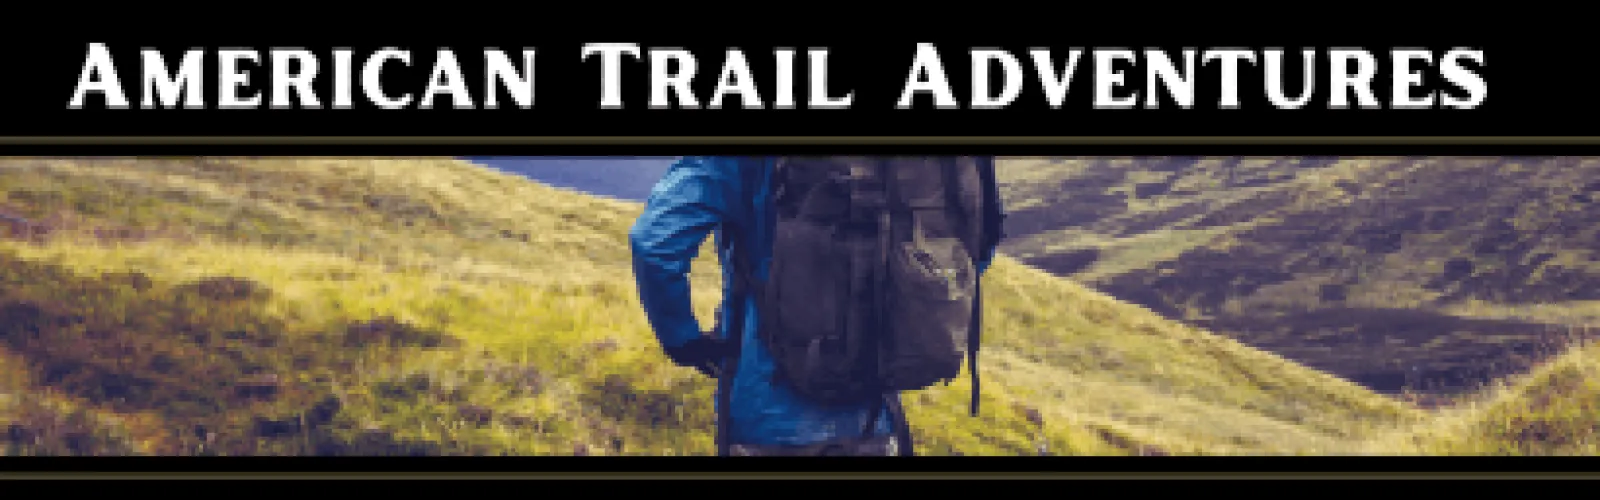 A person wearing a backpack and looking out over hills and trails. Text says American Trail Adventures.